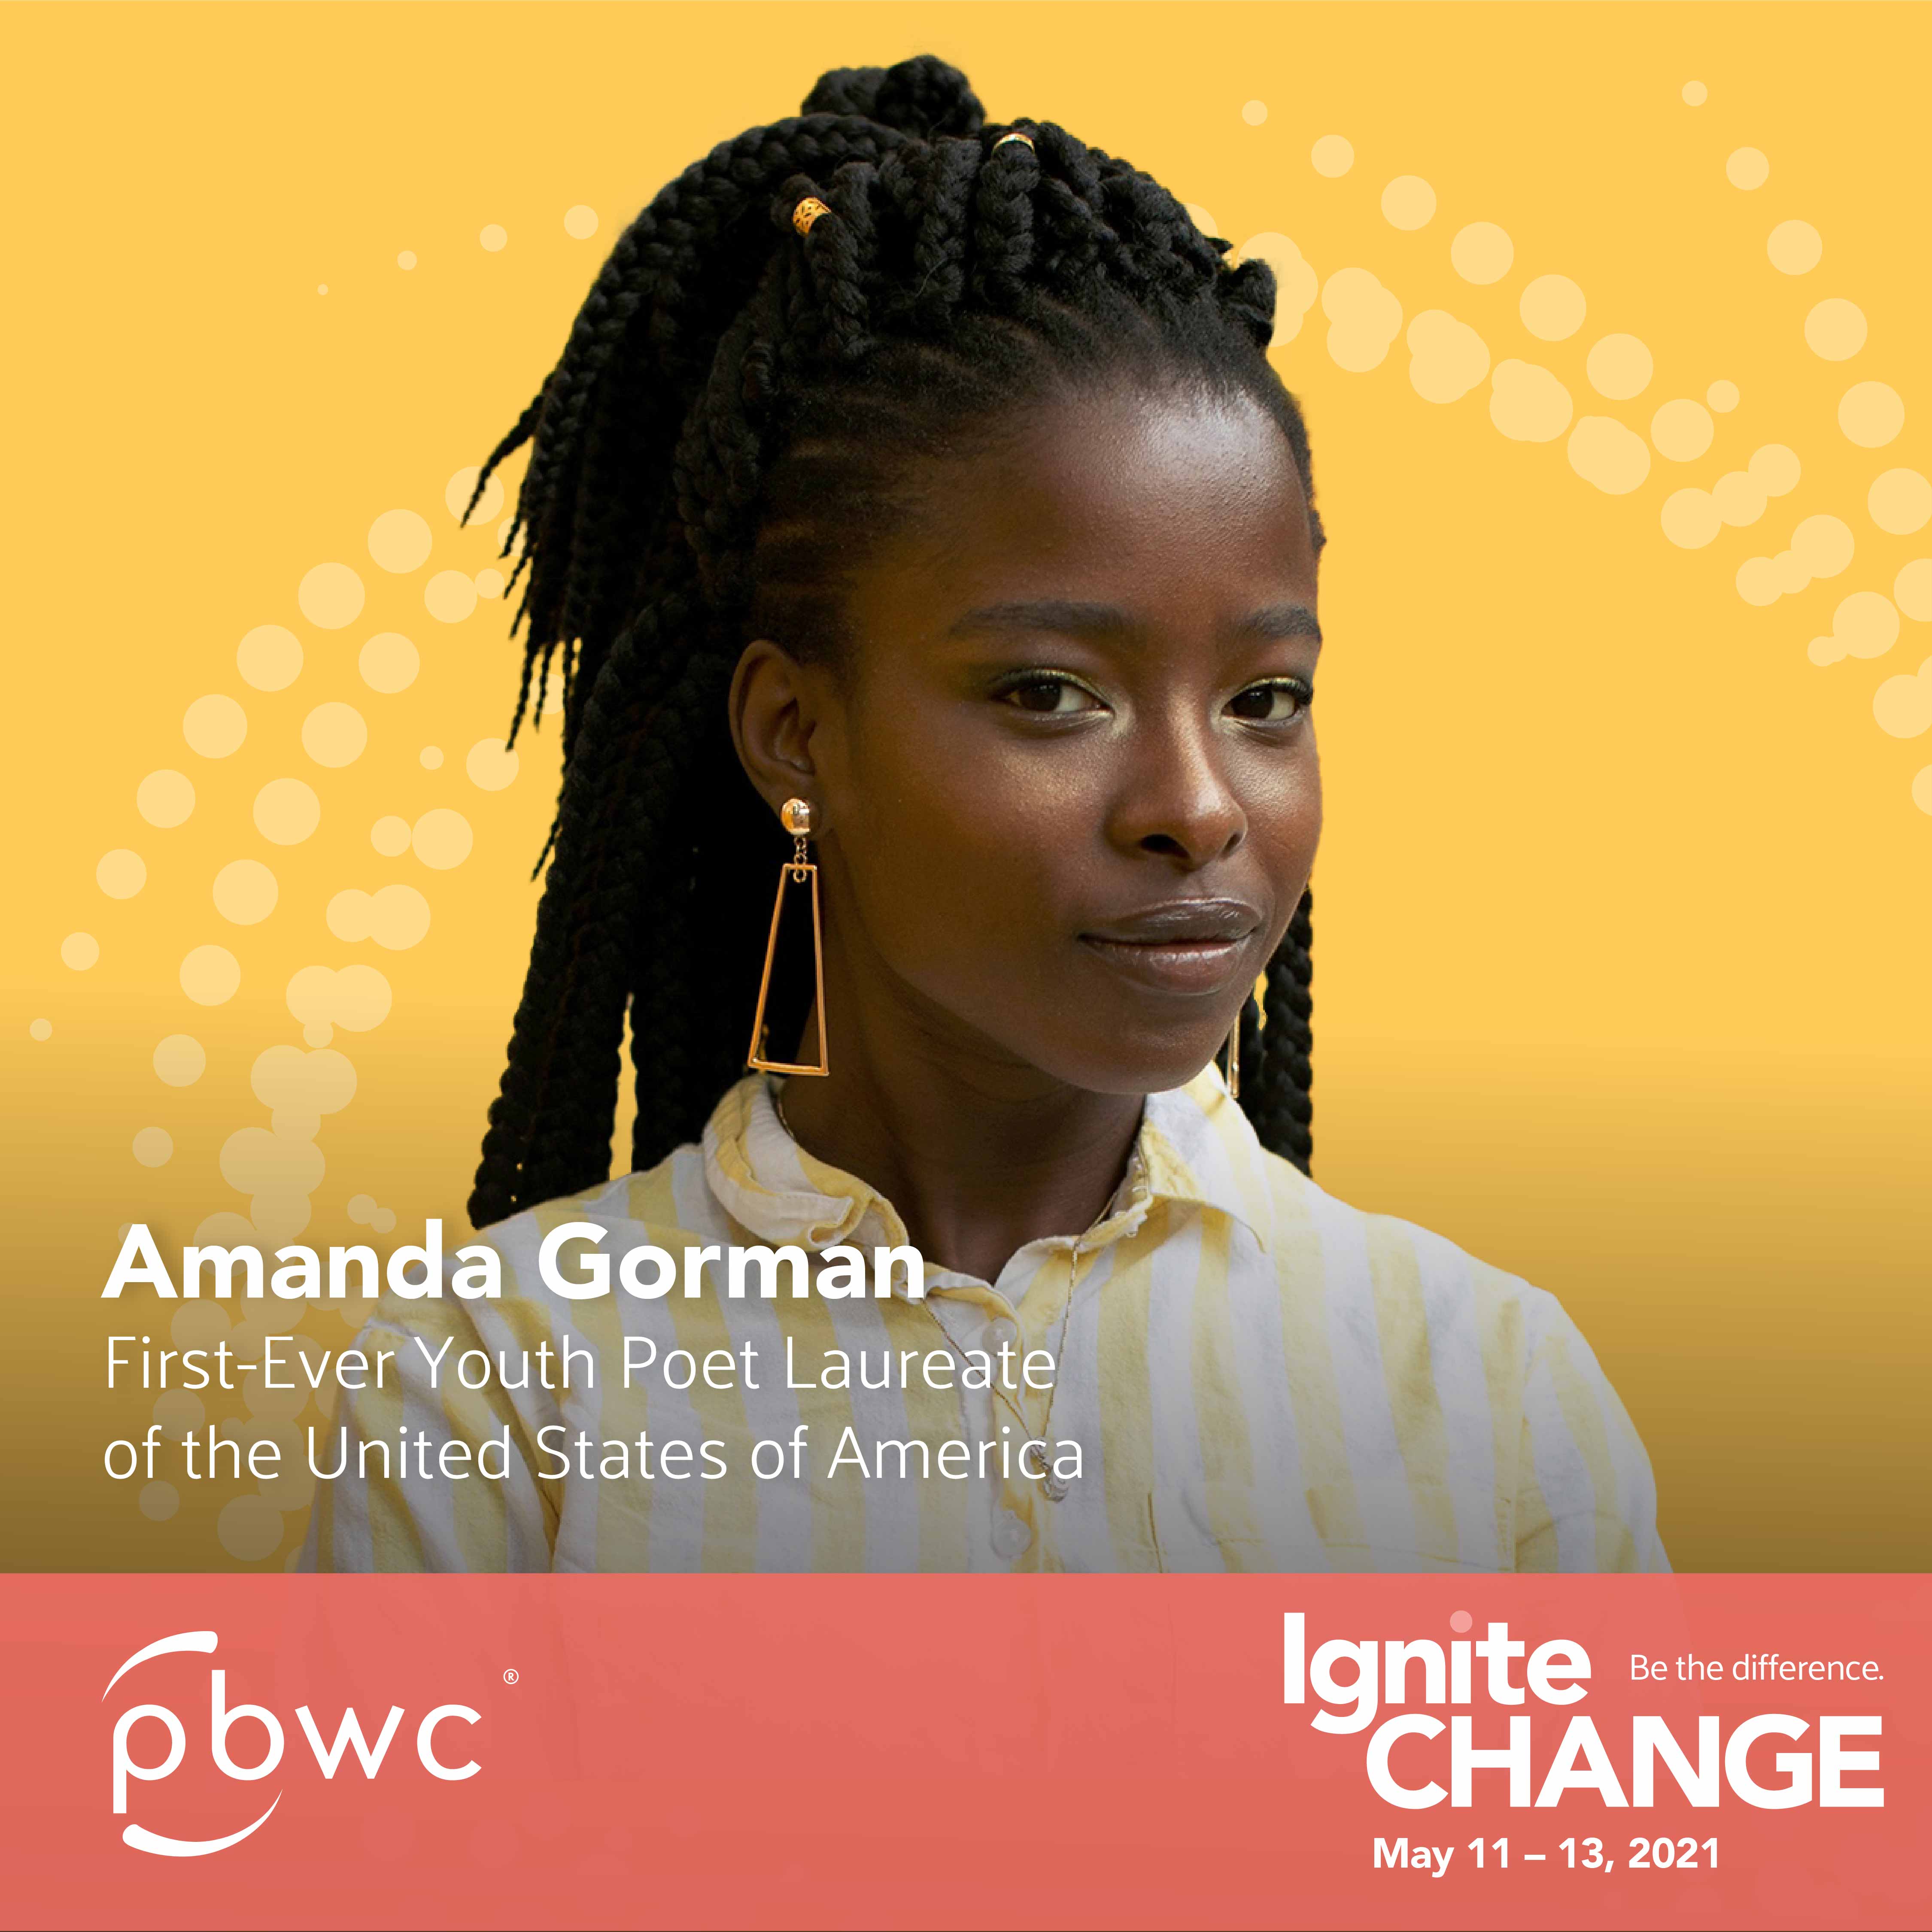 Professional BusinessWomen of California Confirms Amanda Gorman, First-Ever National Youth Poet Laureate of the United States of America, as Keynote Speaker for IgniteCHANGE Conference.